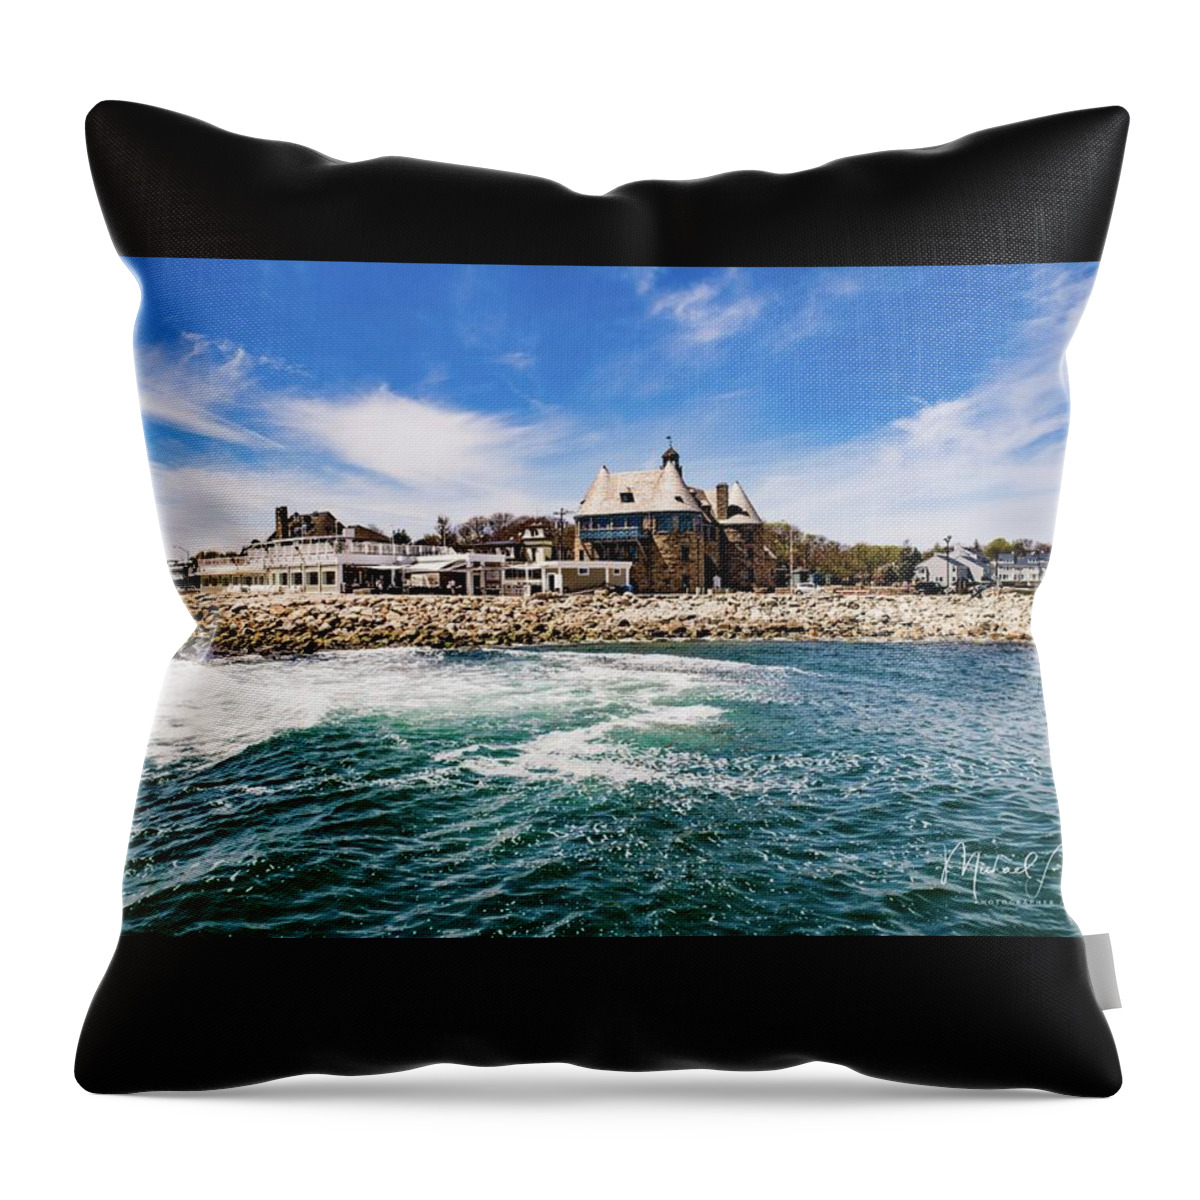 The Towers Throw Pillow featuring the photograph The Towers of Narragansett by Veterans Aerial Media LLC